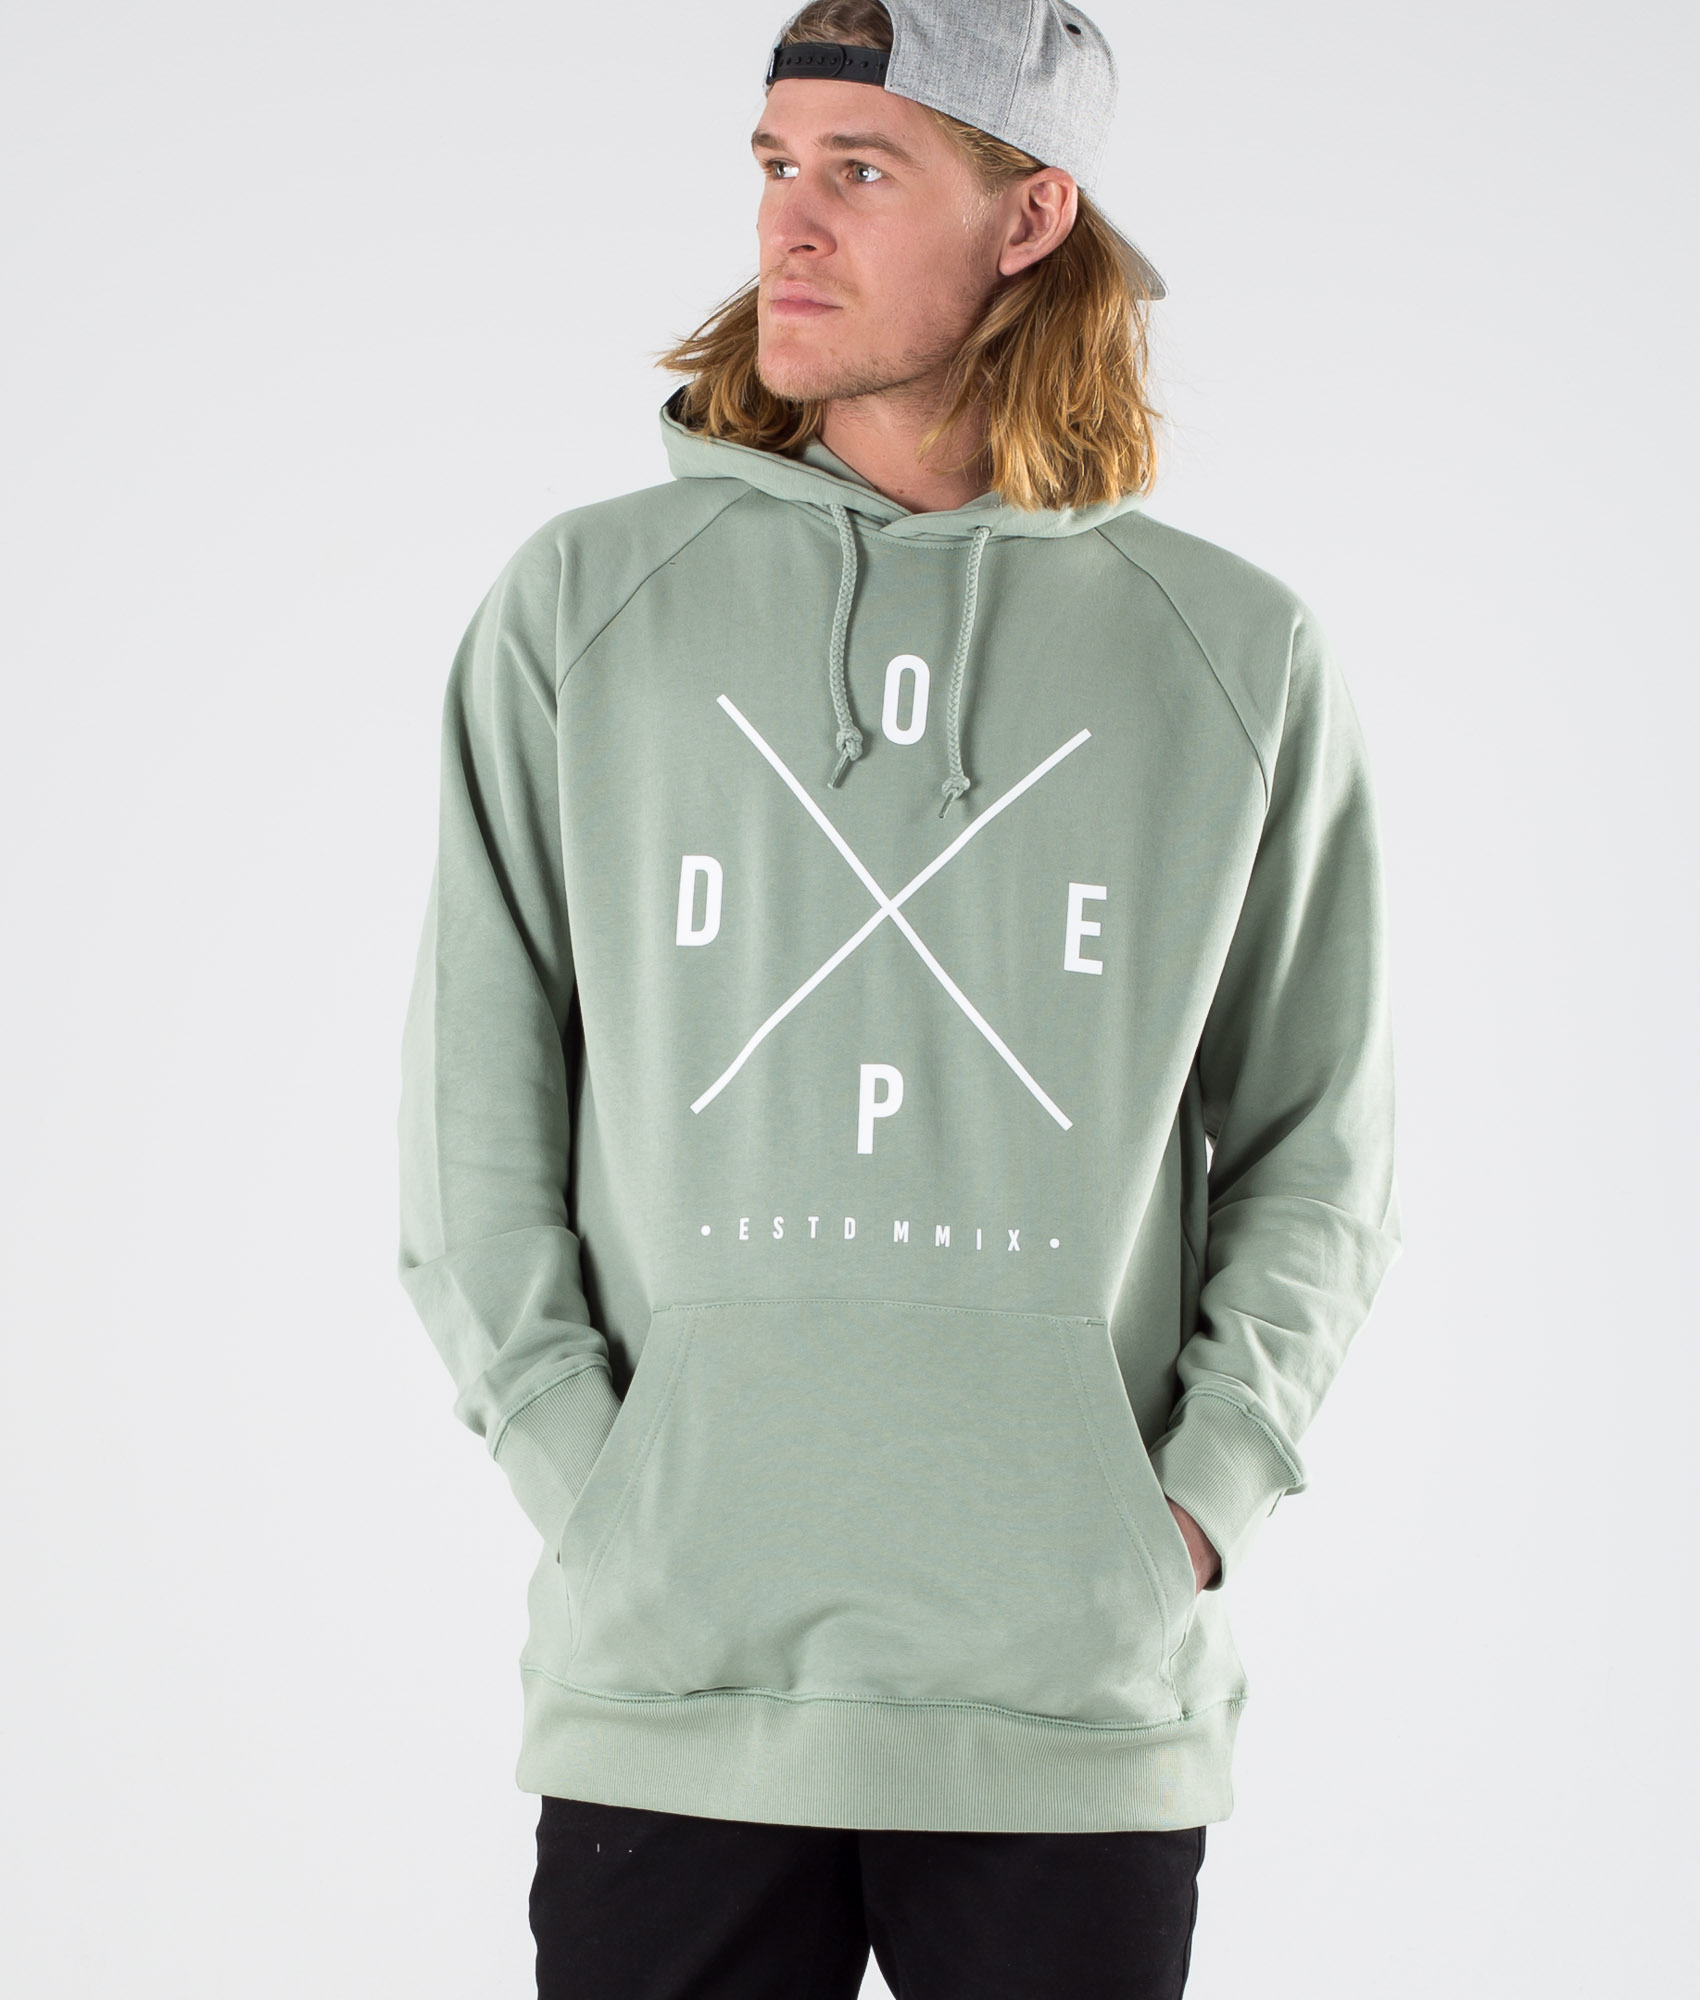 green and grey hoodie